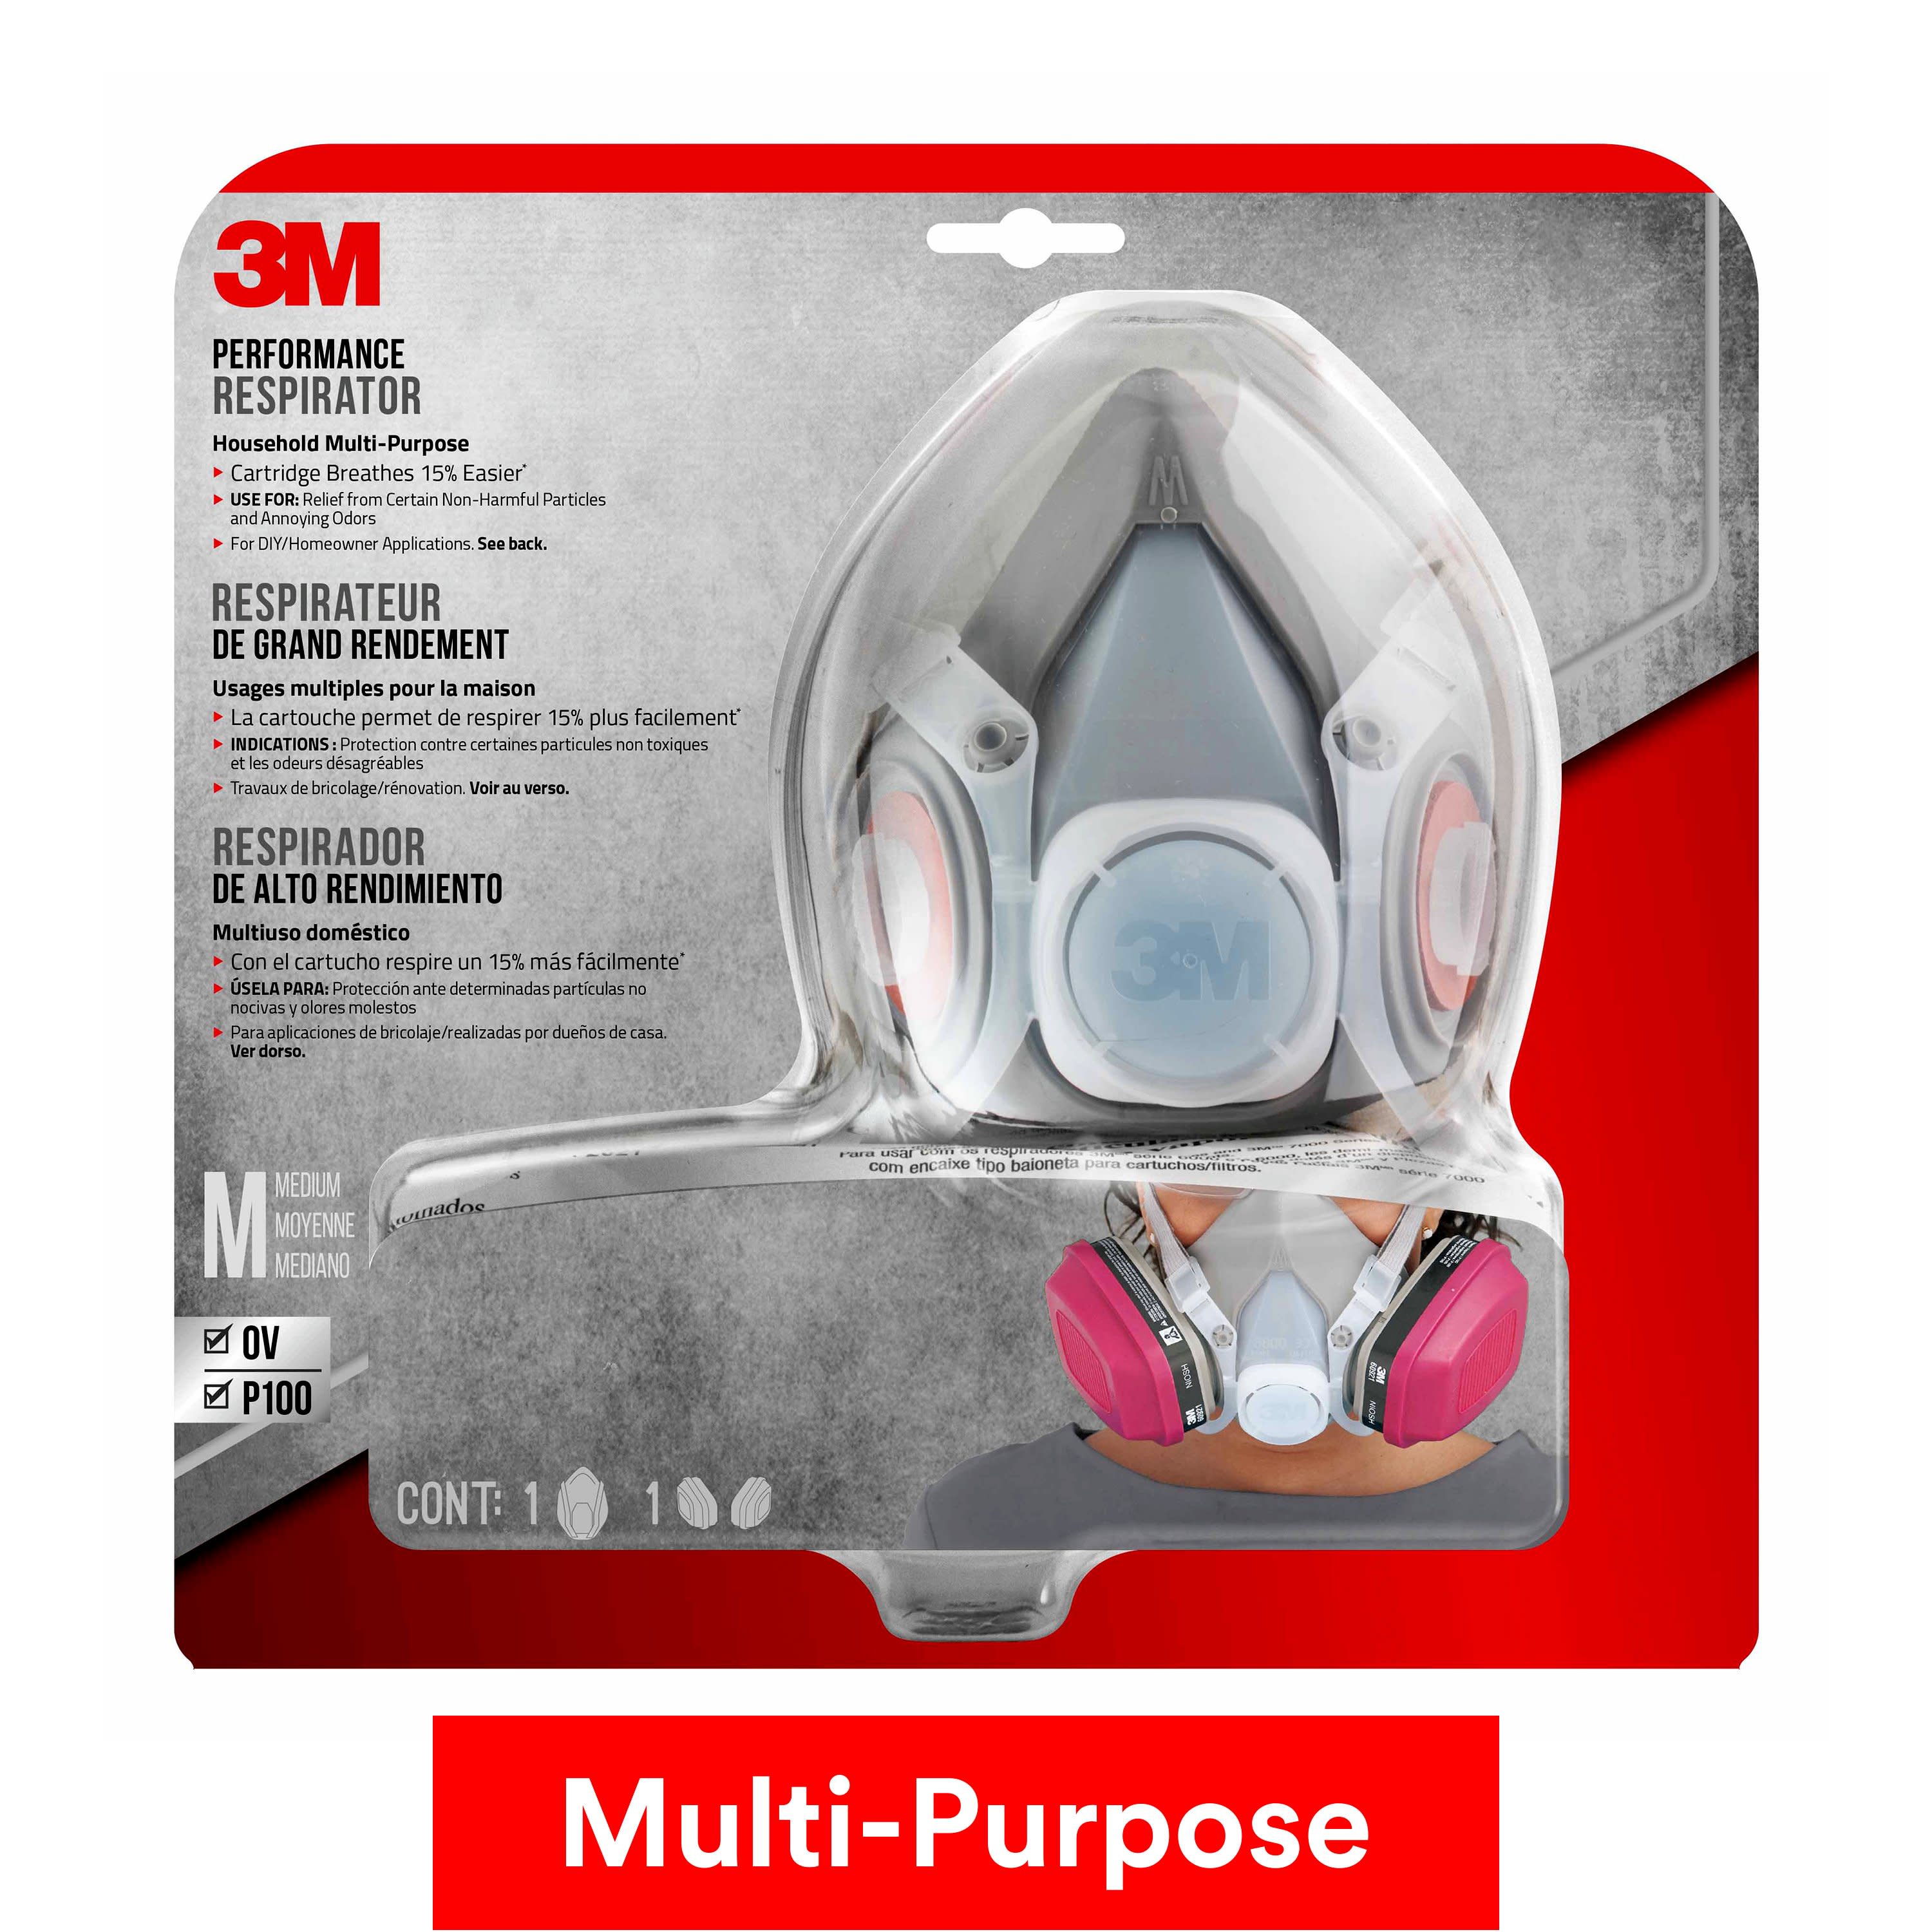 3M Performance Respirator Paint Project Multi Purpose Size Large for sale online 